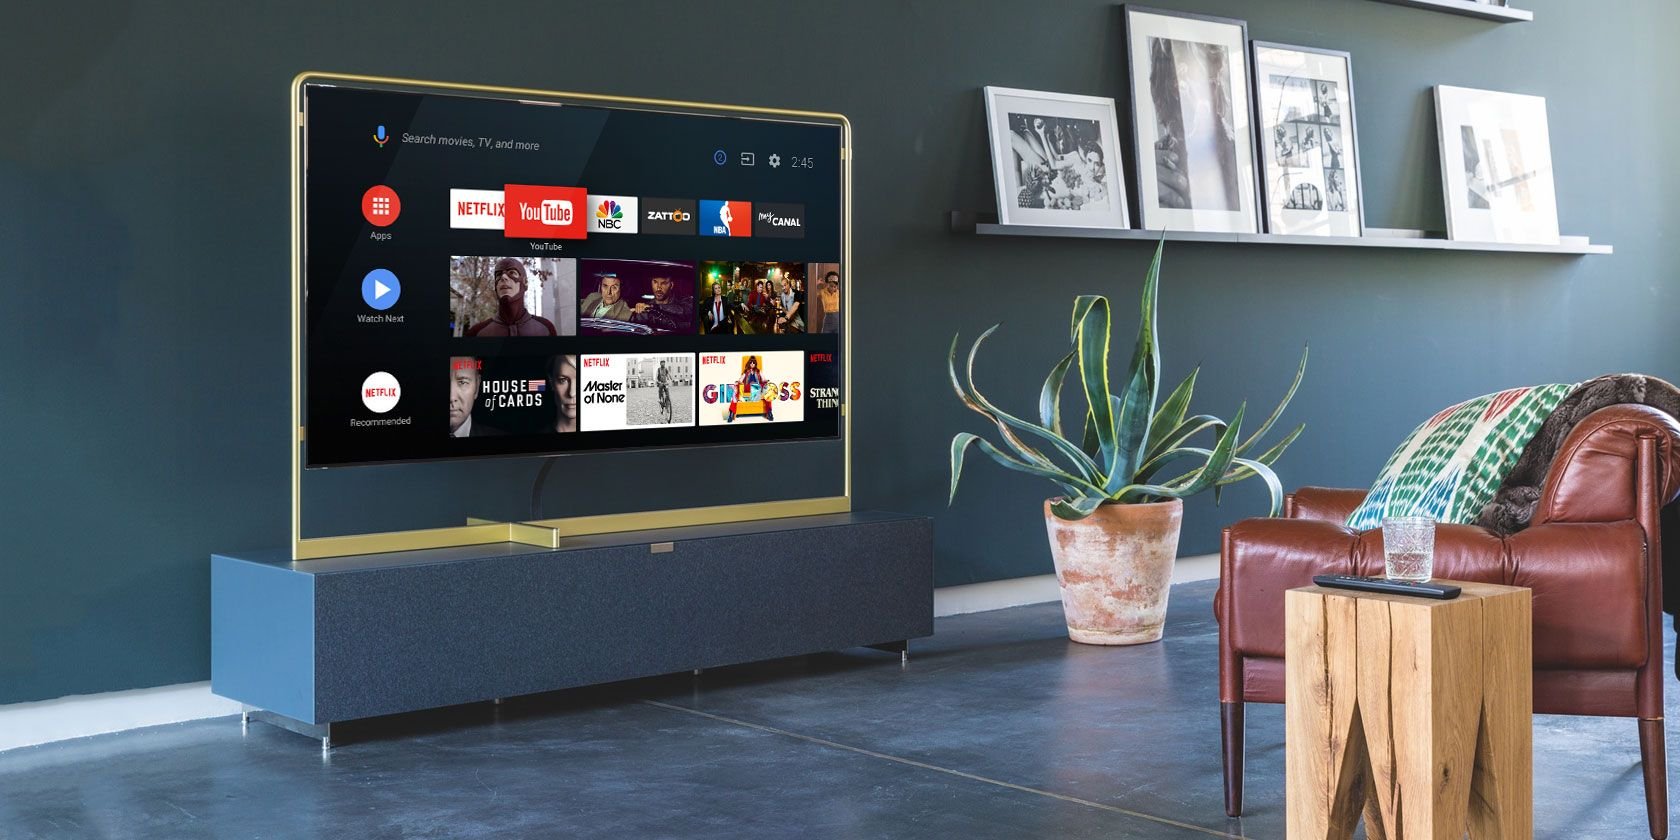 The 7 Best Android TV Apps Worth Sideloading